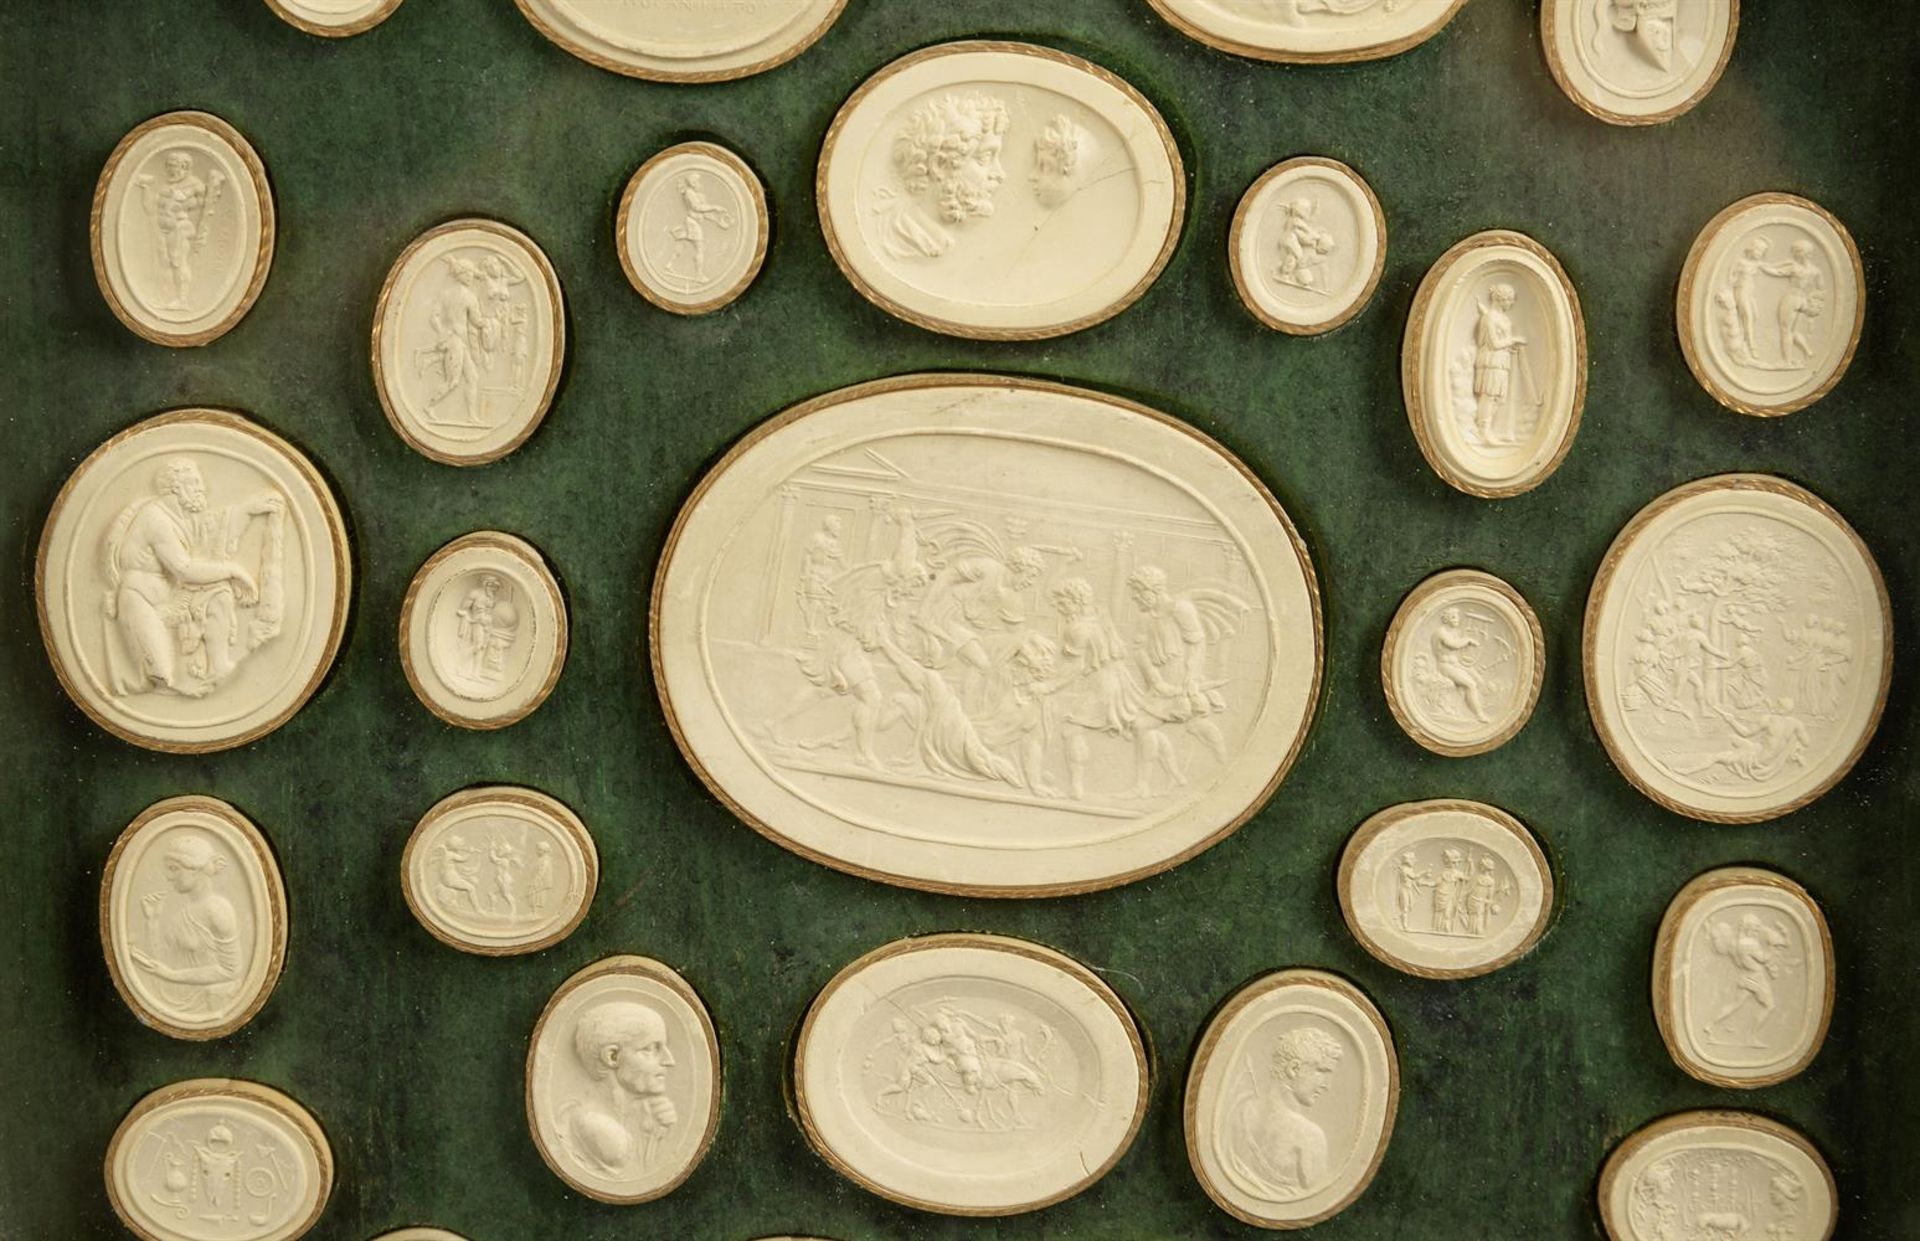 A SET OF FOUR FRAMED SETS OF PLASTER IMPRONTE OR INTAGLIOS, EARLY 19TH CENTURY - Image 5 of 5